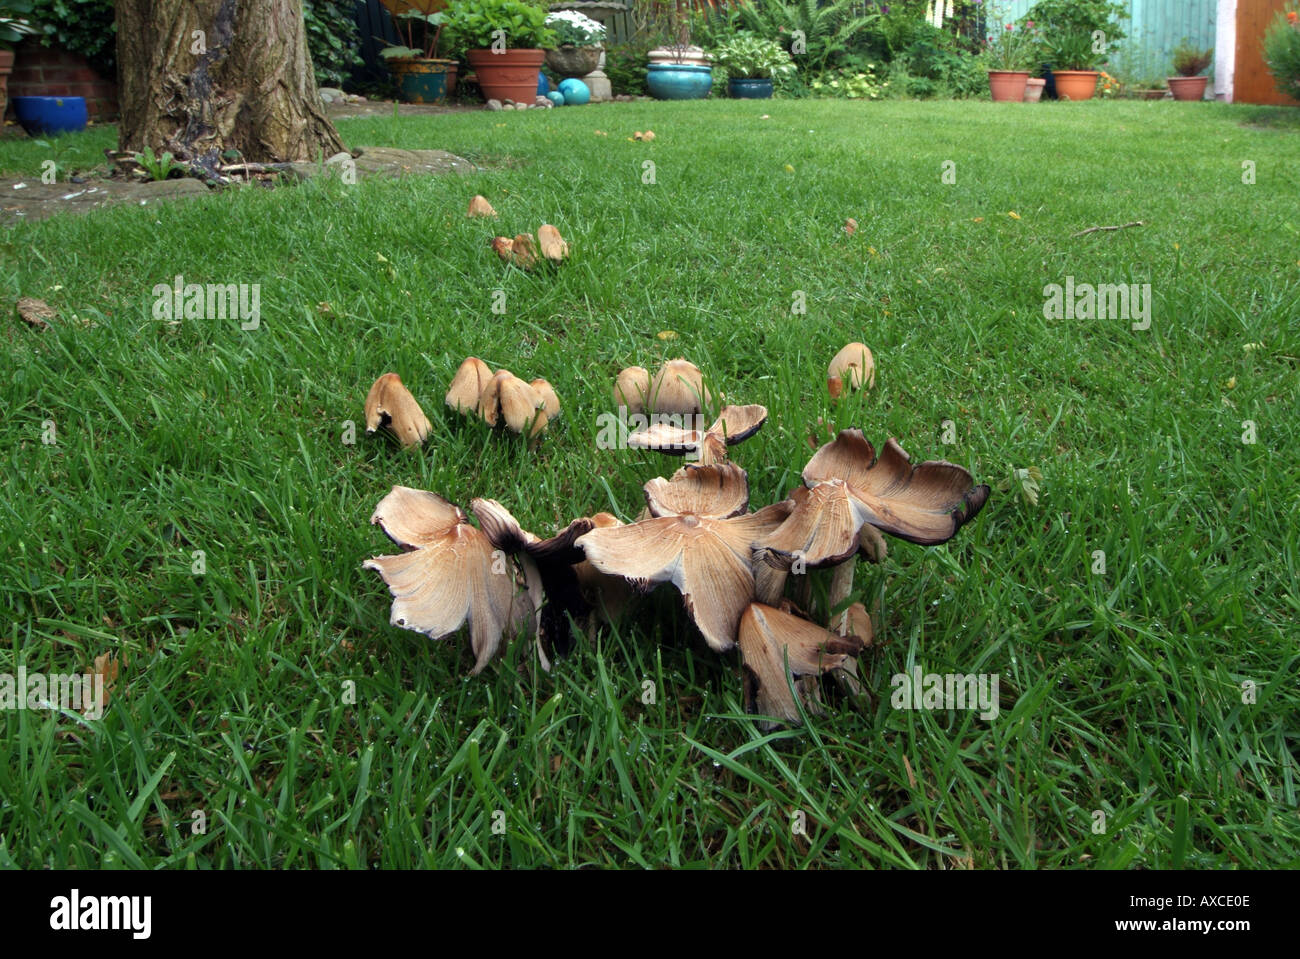 Fungi growing on grass lawn to domestic dwelling house Stock Photo